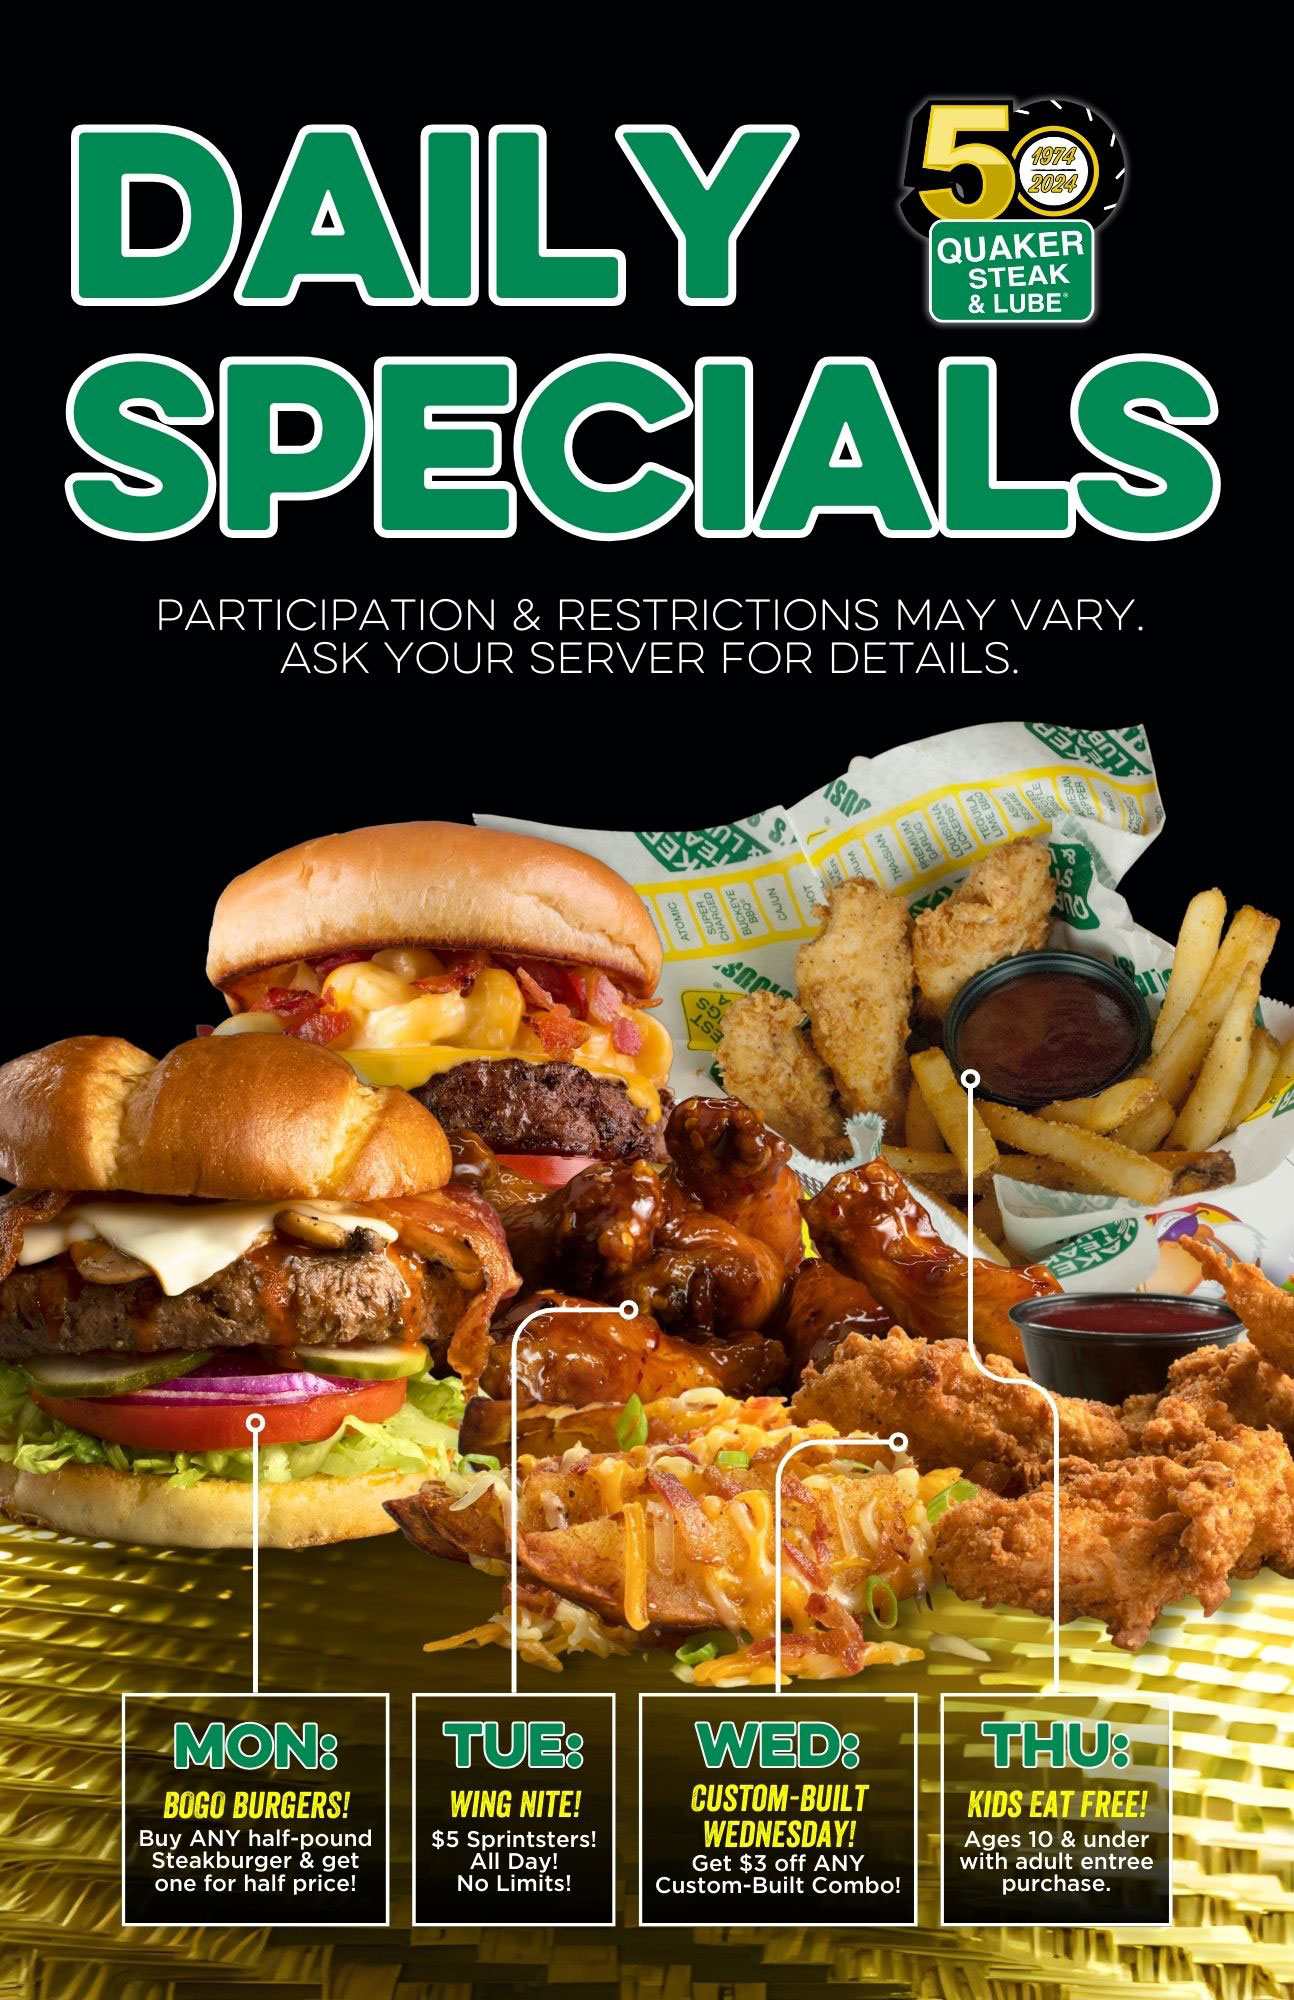 Daily Specials At the Quaker Steak & Lube Valley View Restaurant